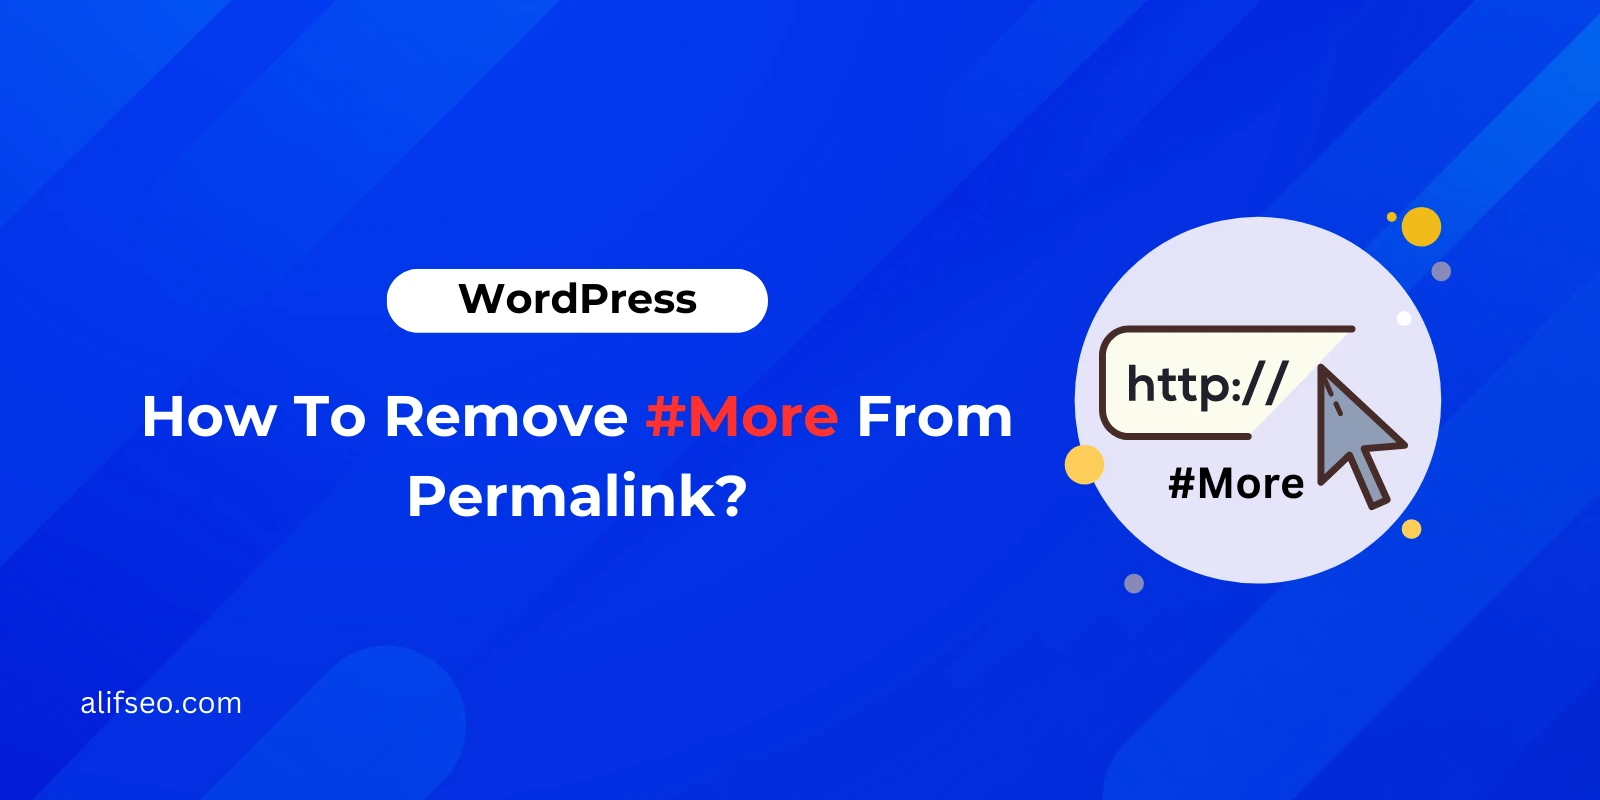 How To Remove #More From Permalink?